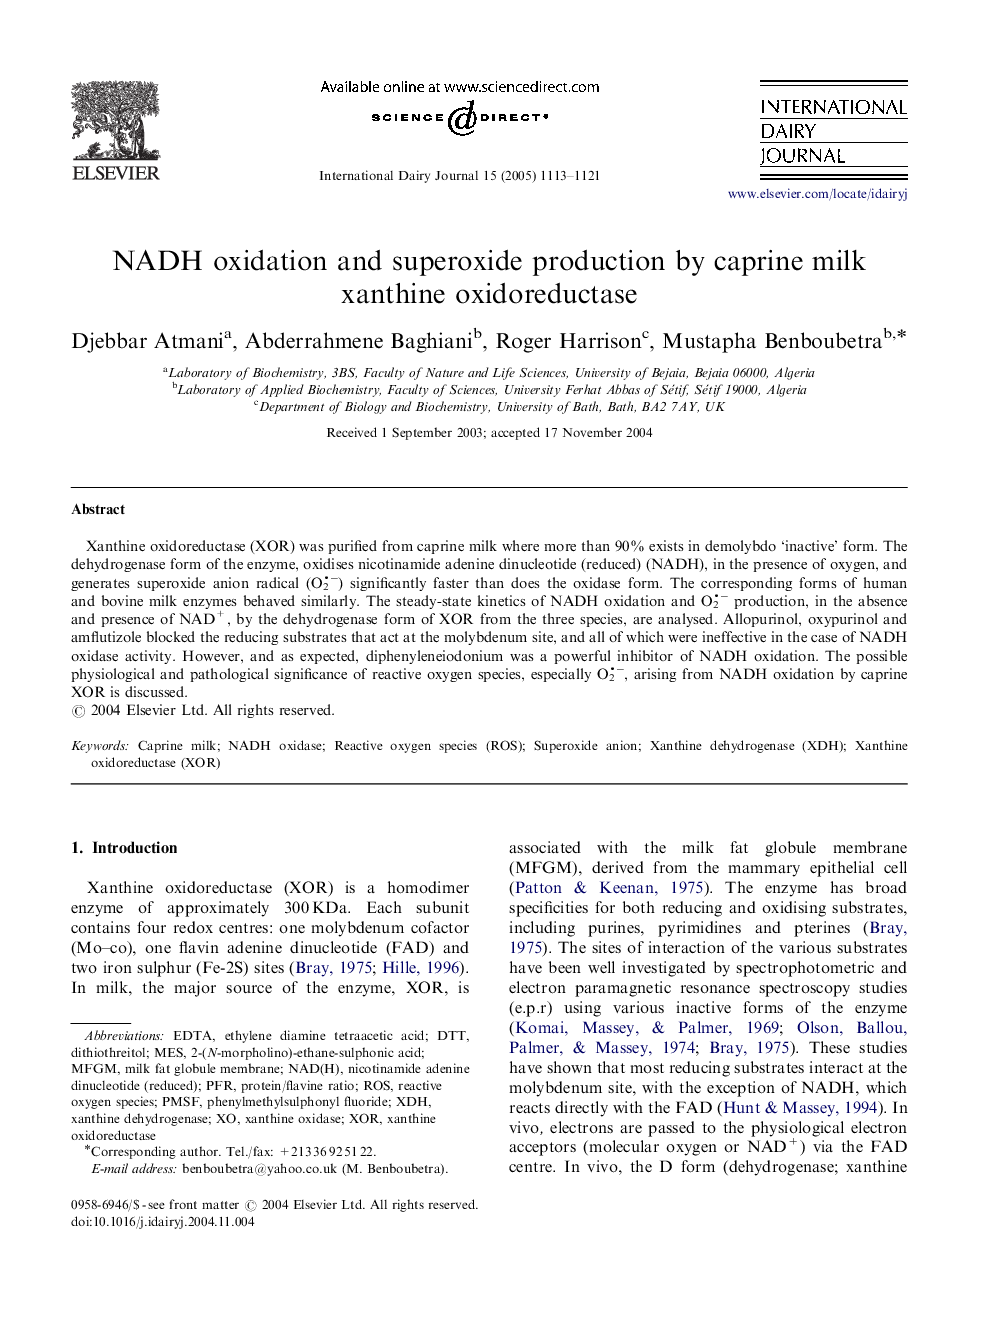 NADH oxidation and superoxide production by caprine milk xanthine oxidoreductase